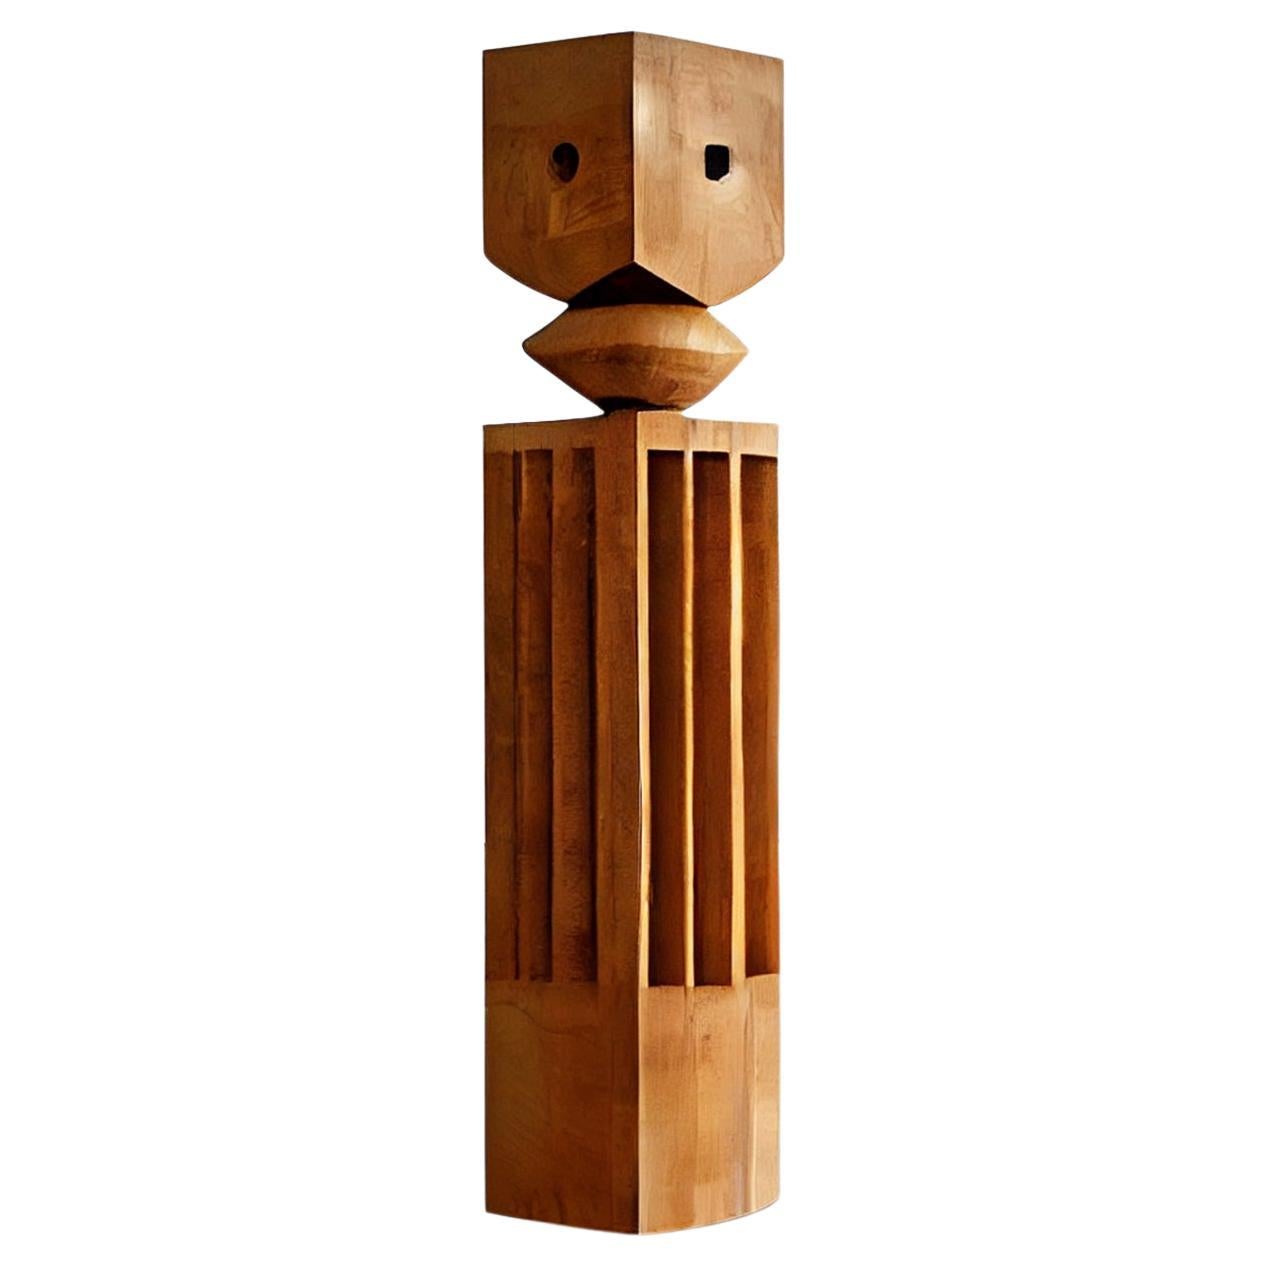 Figurative Wood Sculpture Inspired in Constantin Brancusi Art, 3 Kings by Nono C For Sale